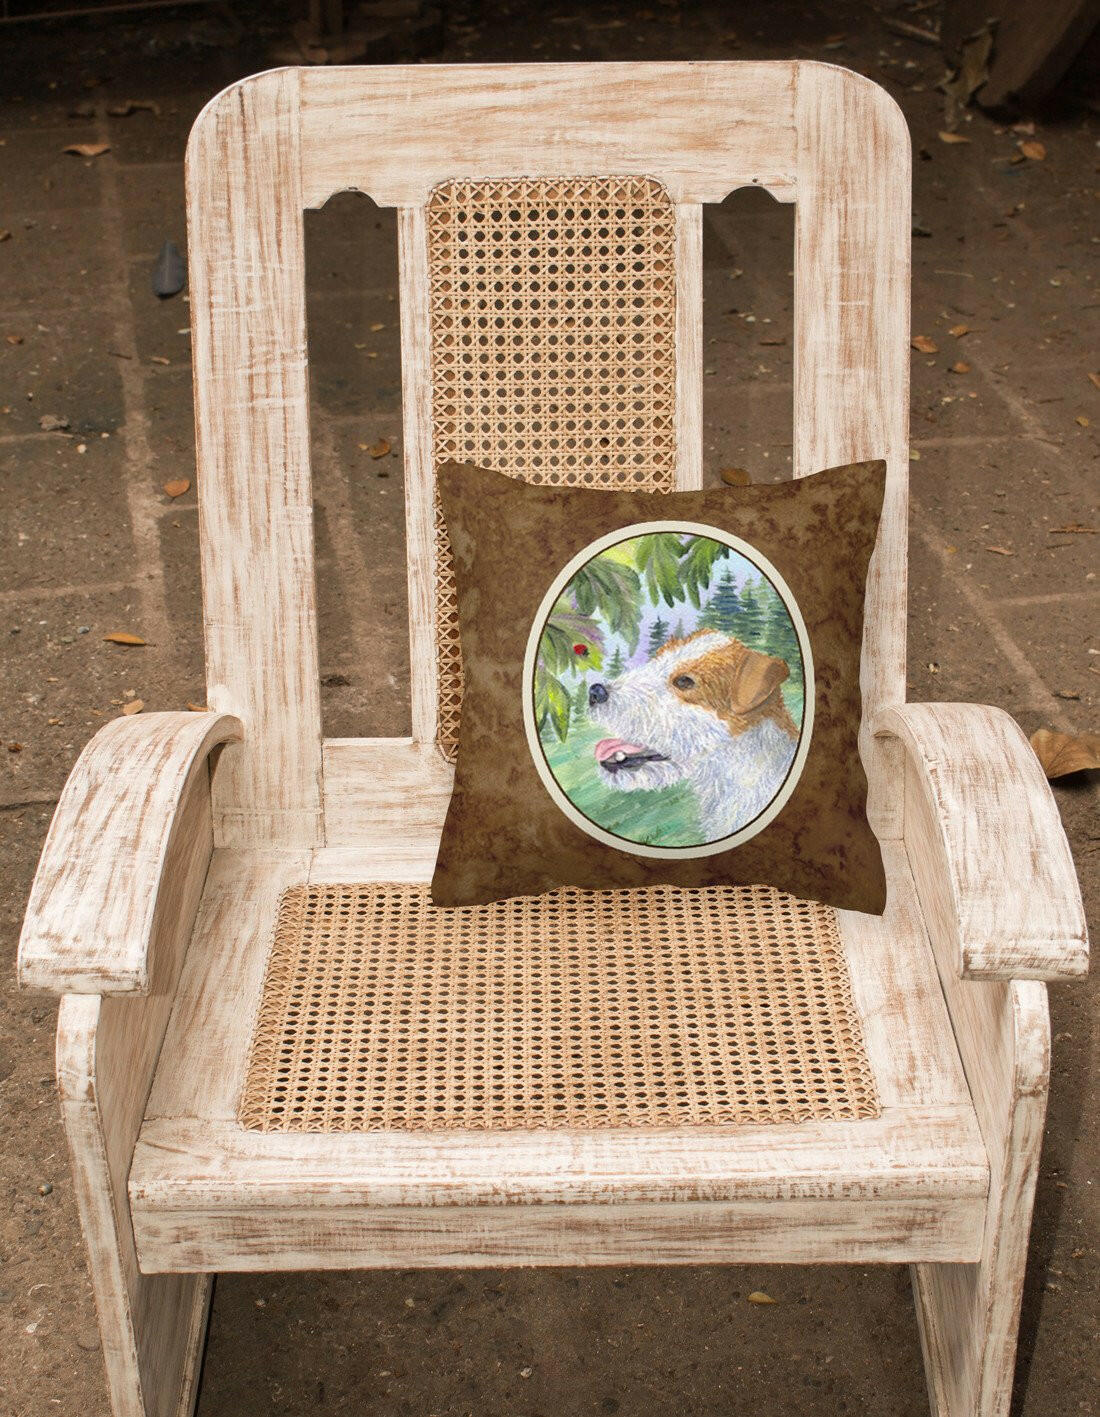 Jack Russell Terrier Decorative   Canvas Fabric Pillow by Caroline's Treasures